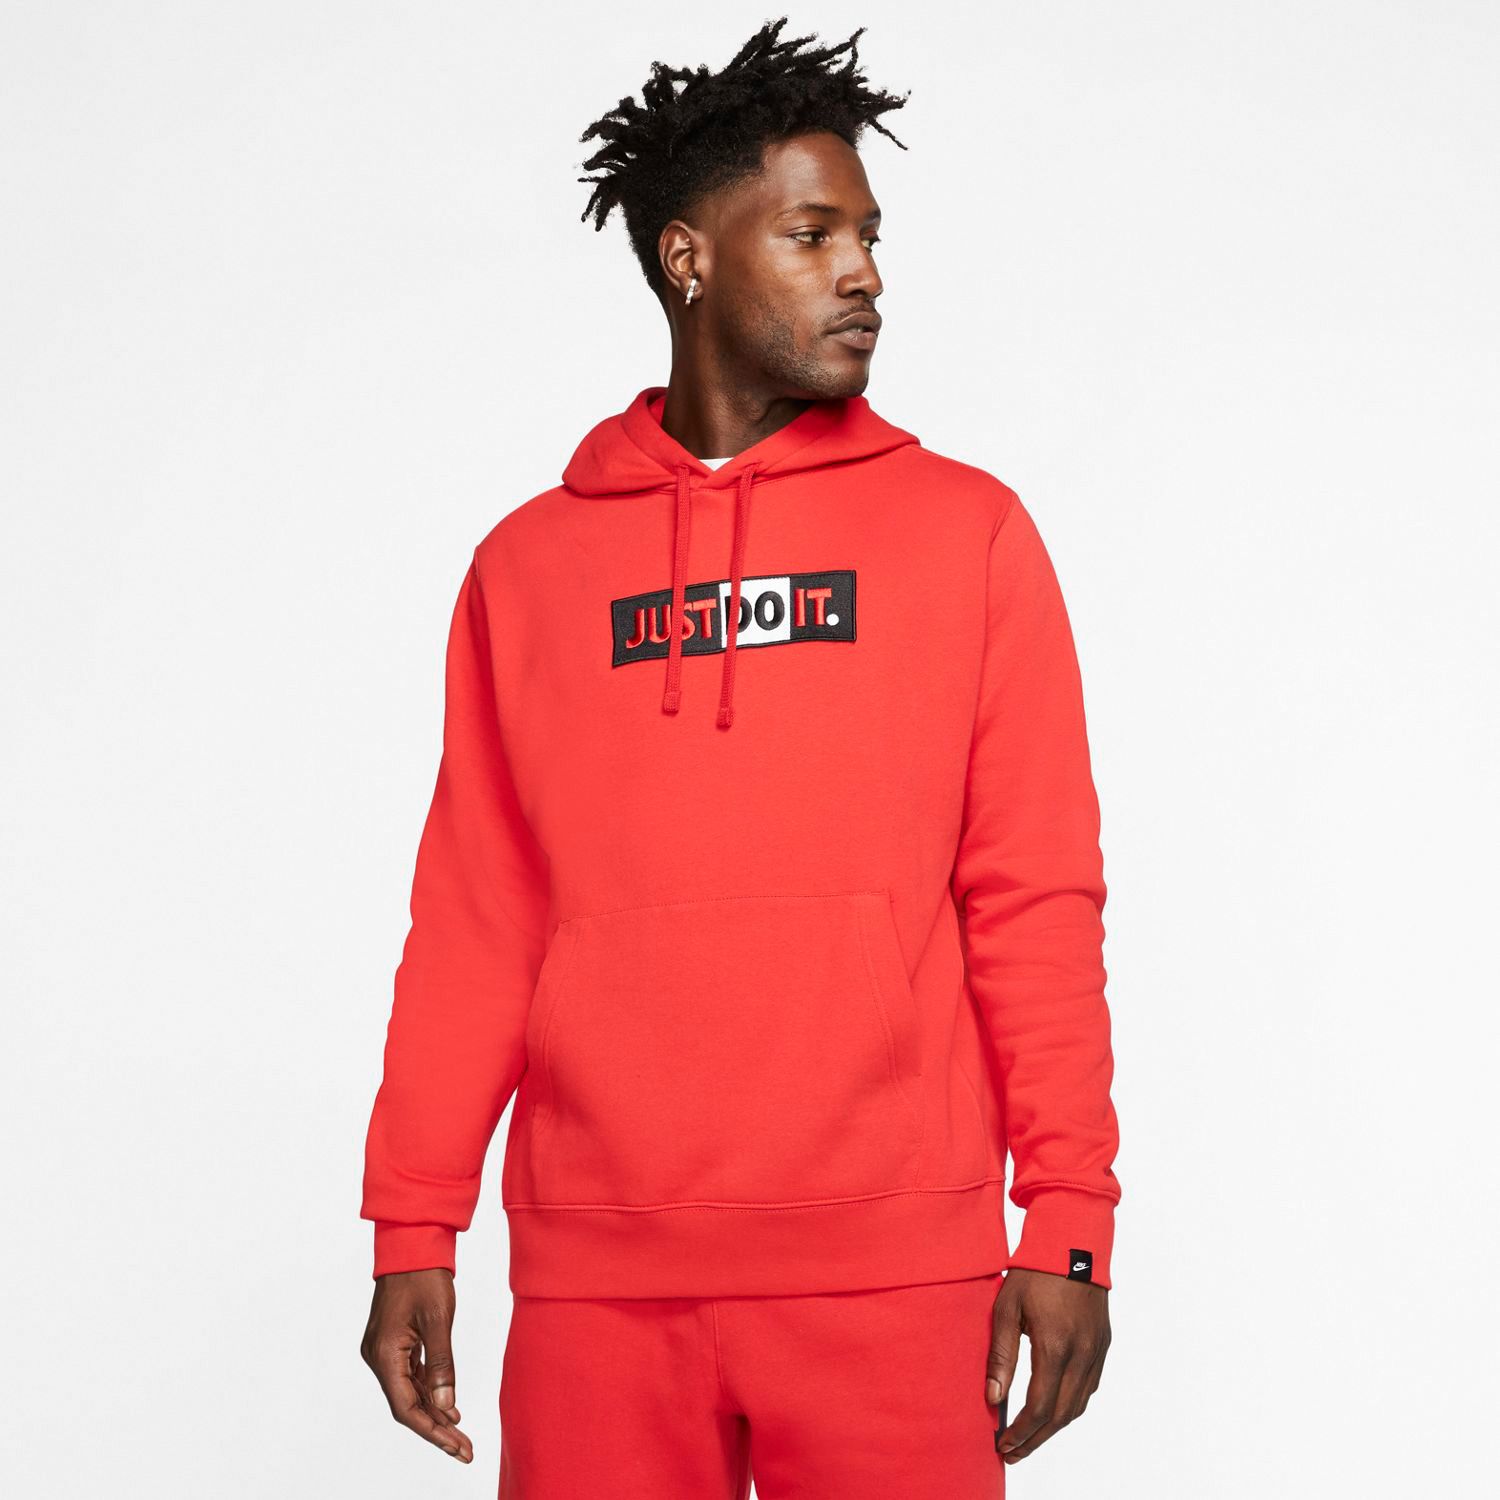 red nike hoodie just do it